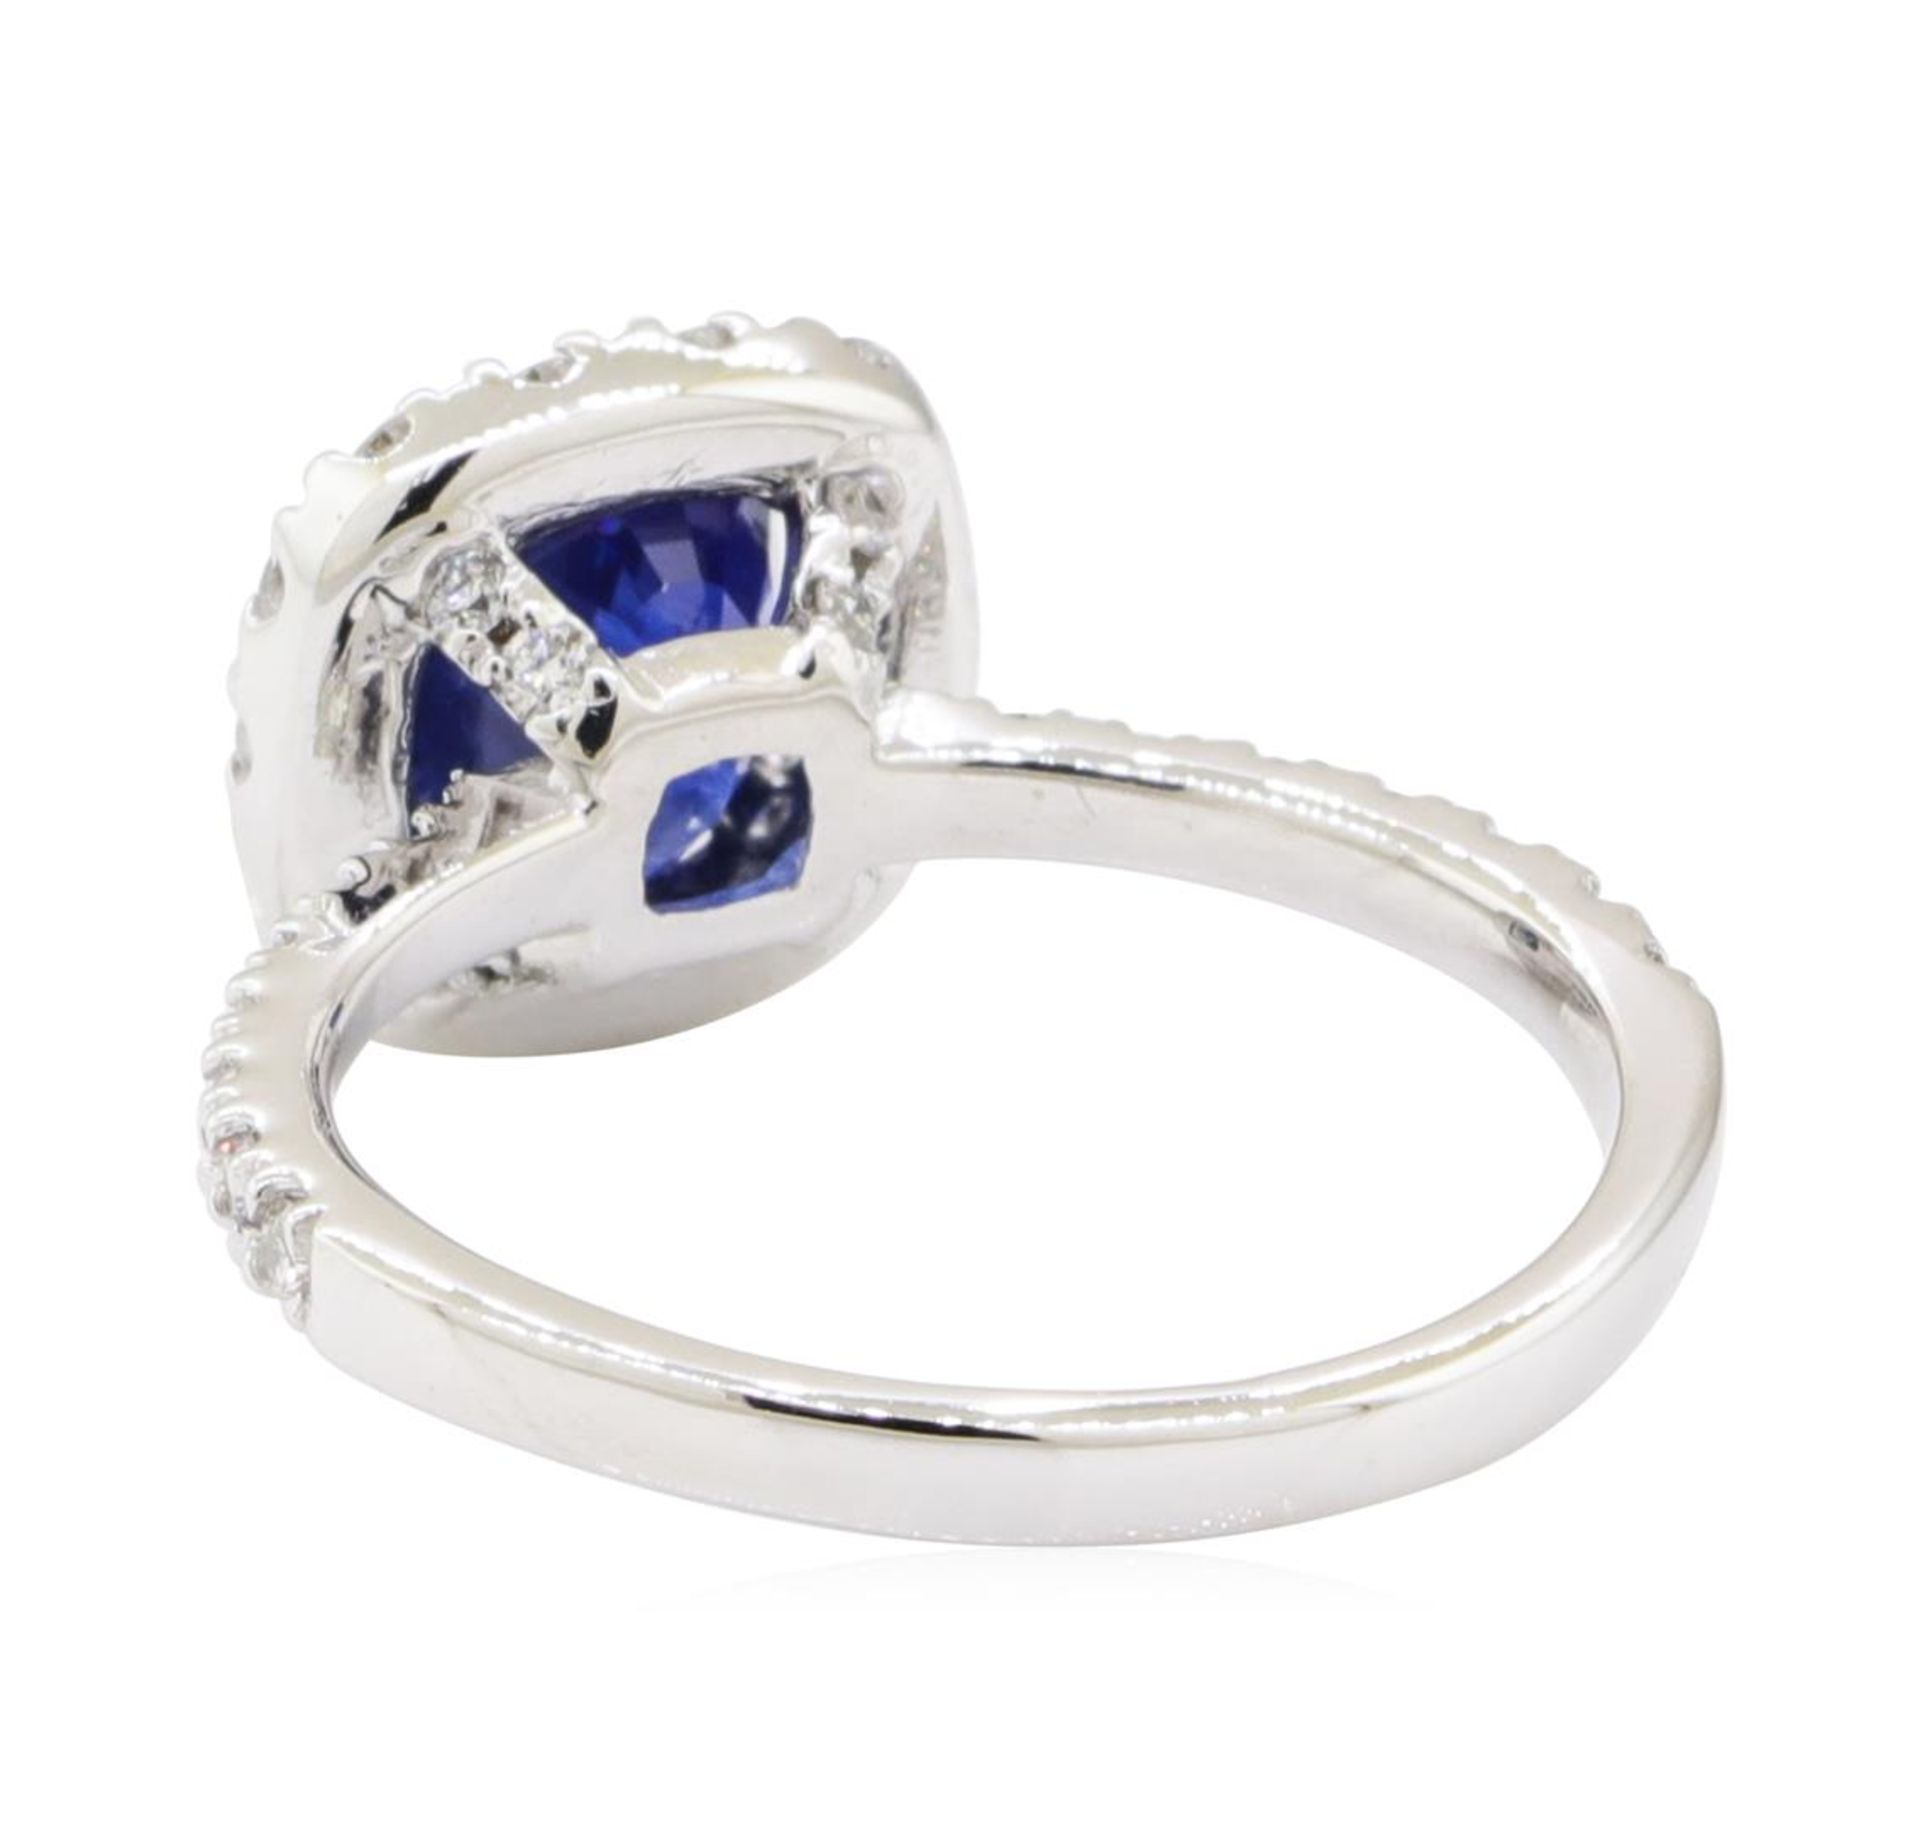 1.98 ctw Sapphire and Diamond Ring - 14KT White Gold - Image 3 of 5